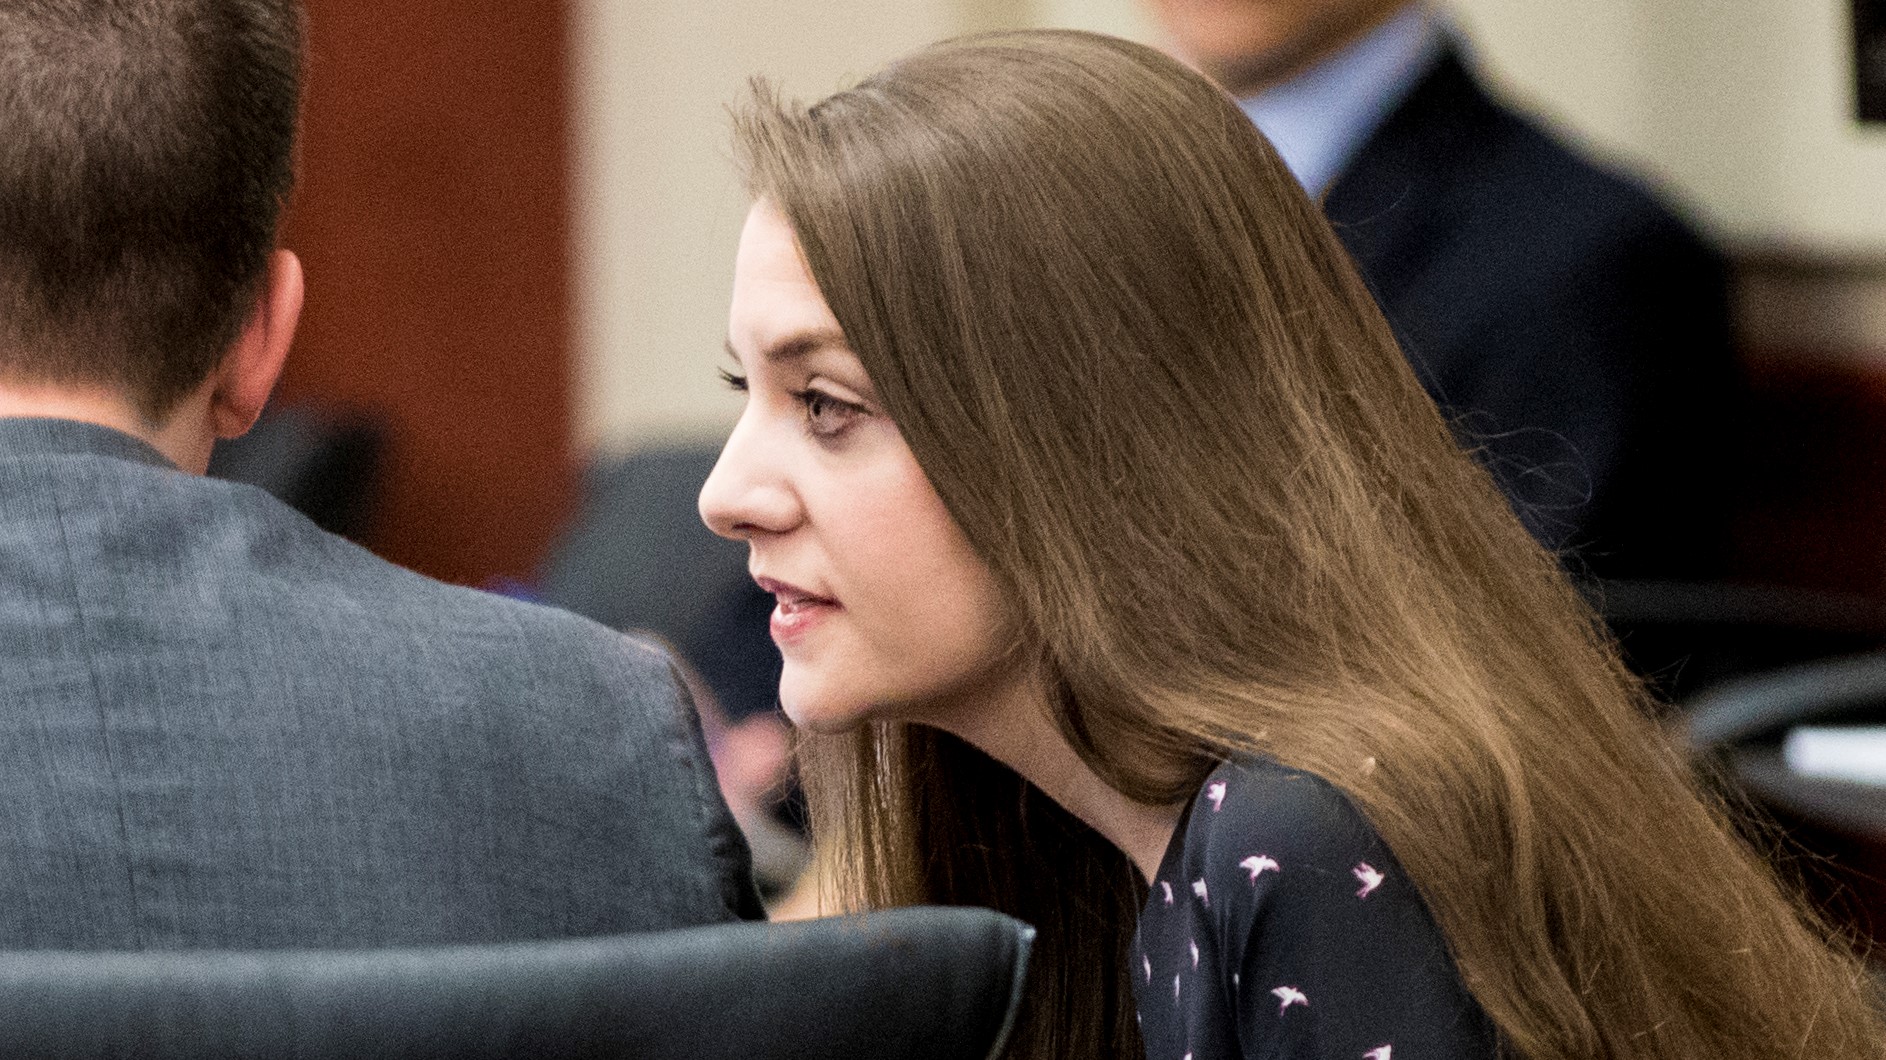 Shayna Hubers, 27, talks to Zachary Walden, one of her attorneys, at the beginning of the third day of testimony Thursday, August 16, 2018 at the Campbell County Courthouse in Newport, Ky. Hubers was originally convicted of shooting Ryan Poston six times in his Highland Heights condo on October 12, 2012 and sentenced to 40 years in prison. She was granted a retrial after her attorney discovered a juror in the first trial had a prior felony conviction. The juror's 1992 unpaid child support conviction disqualified him from jury duty under Kentucky law. Campbell County Judge Daniel Zalla is the presiding judge.